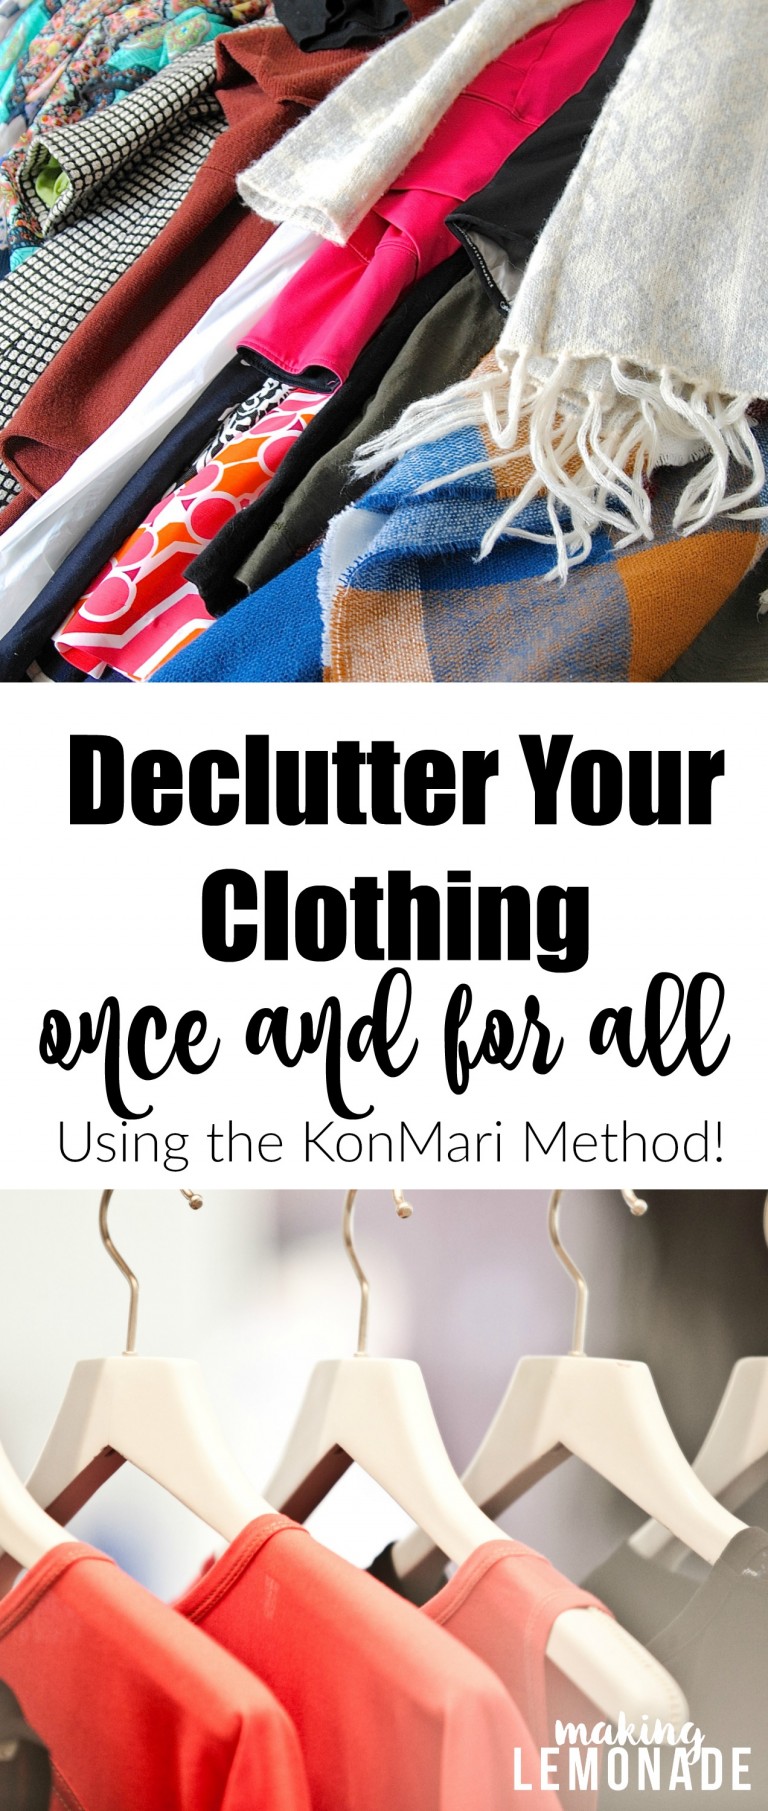 10 Steps to Declutter Your Clothing Once and For All (The KonMari Method)